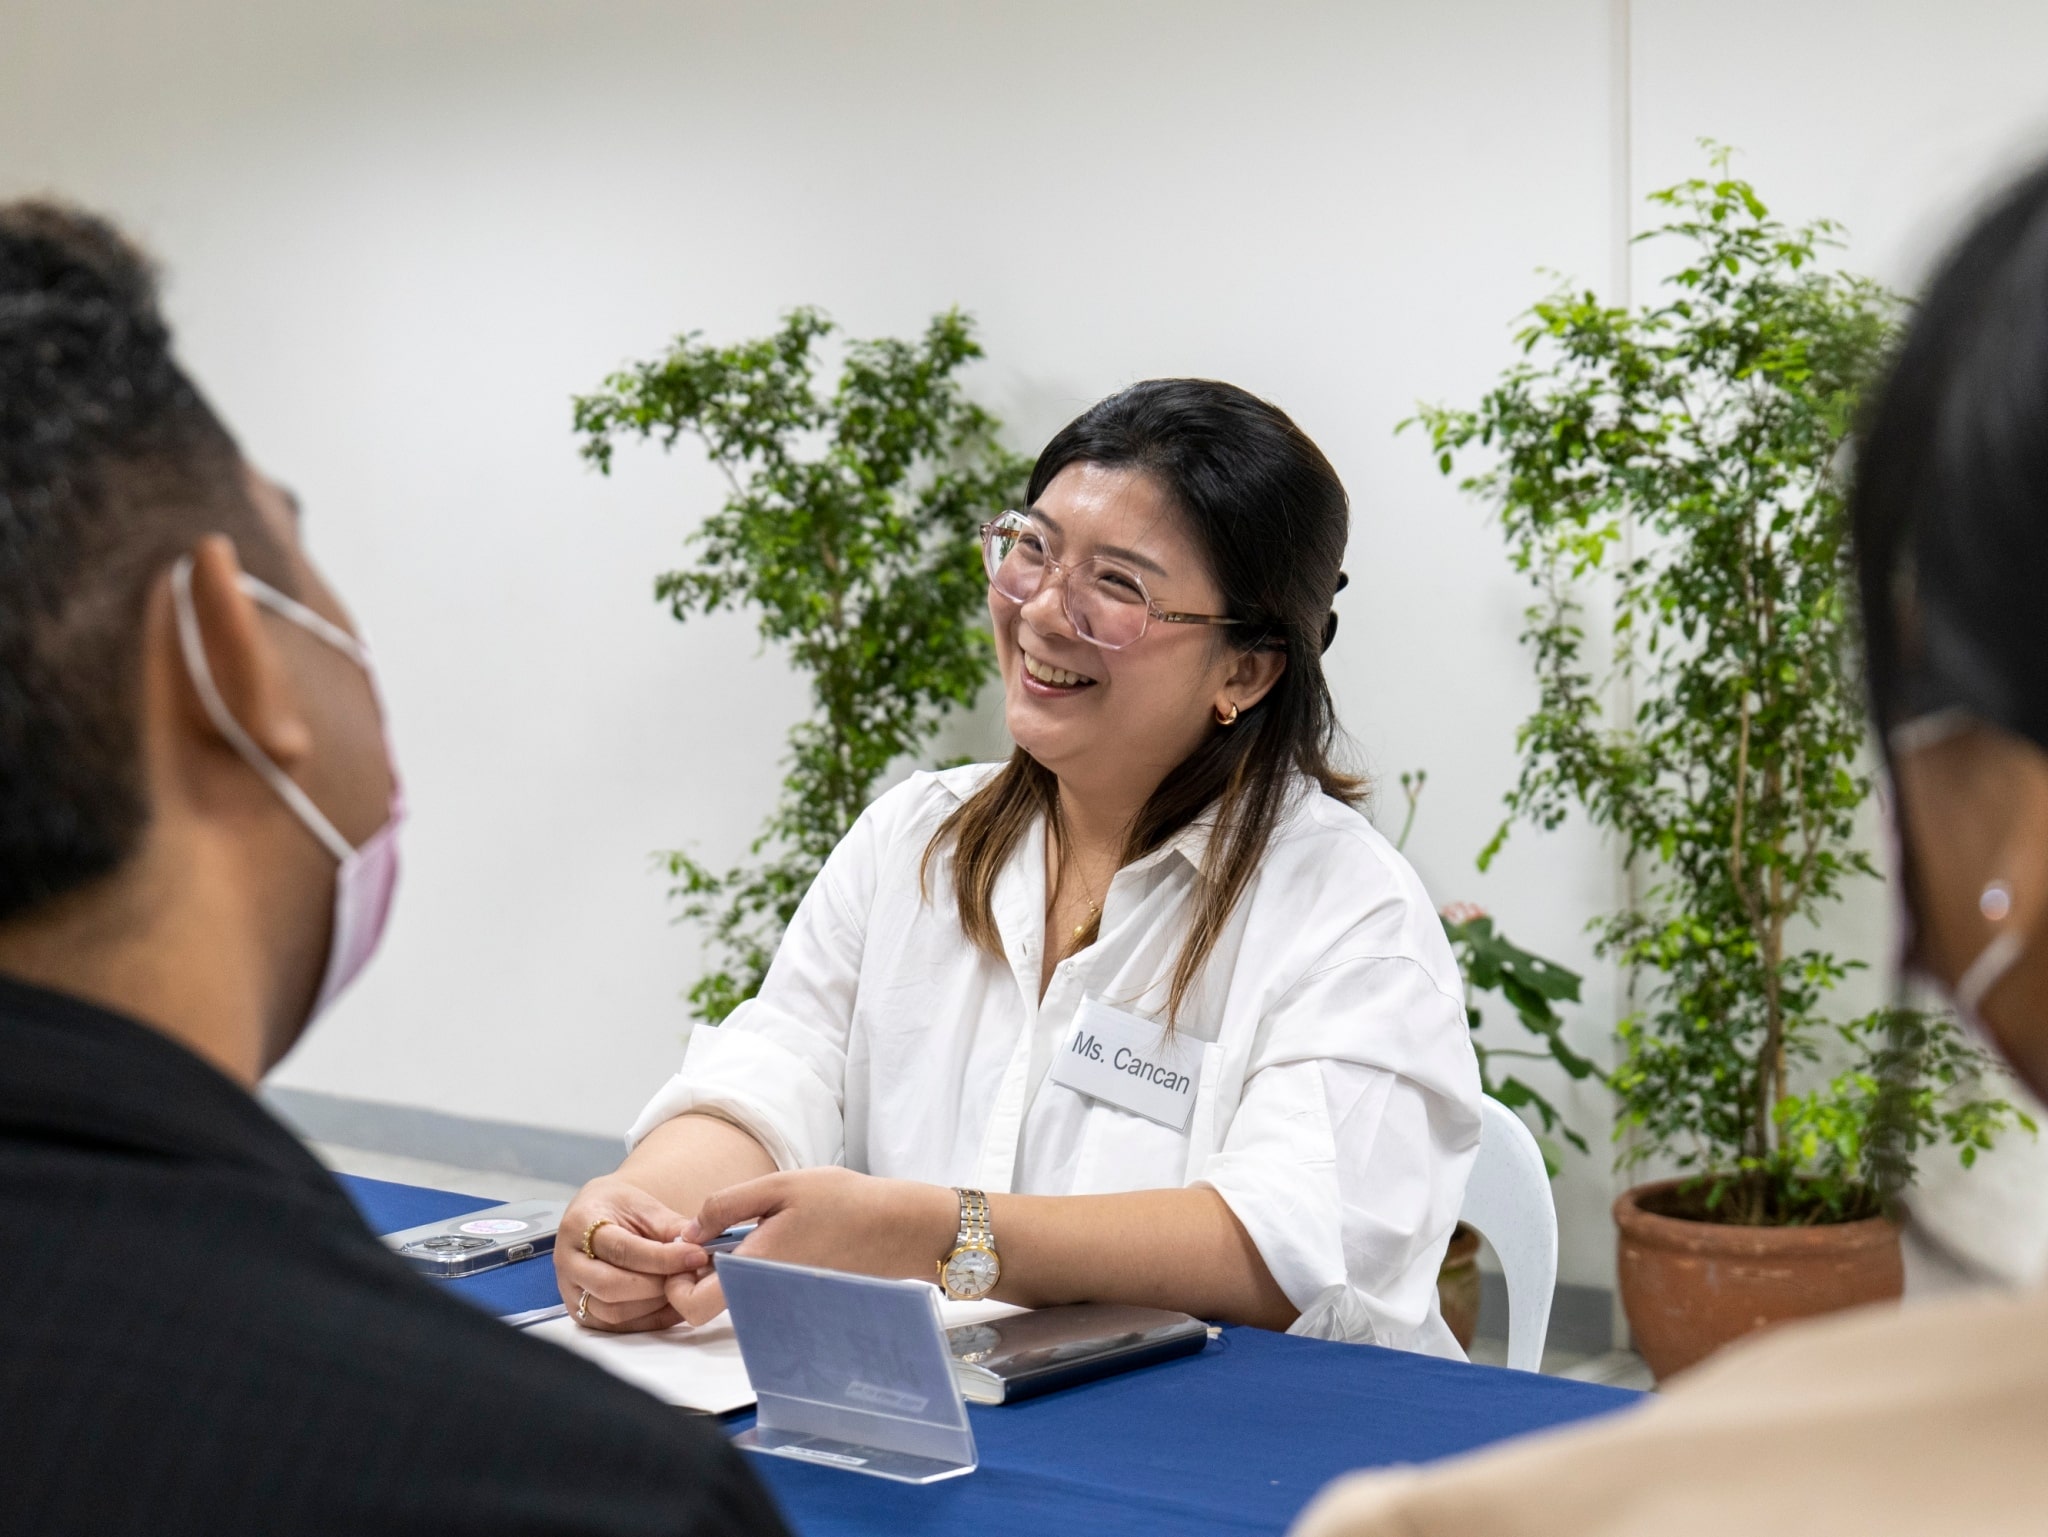 Guests at the mock interview guided students in participating in interviews for their future work opportunities.【Photo by Matt Serrano】